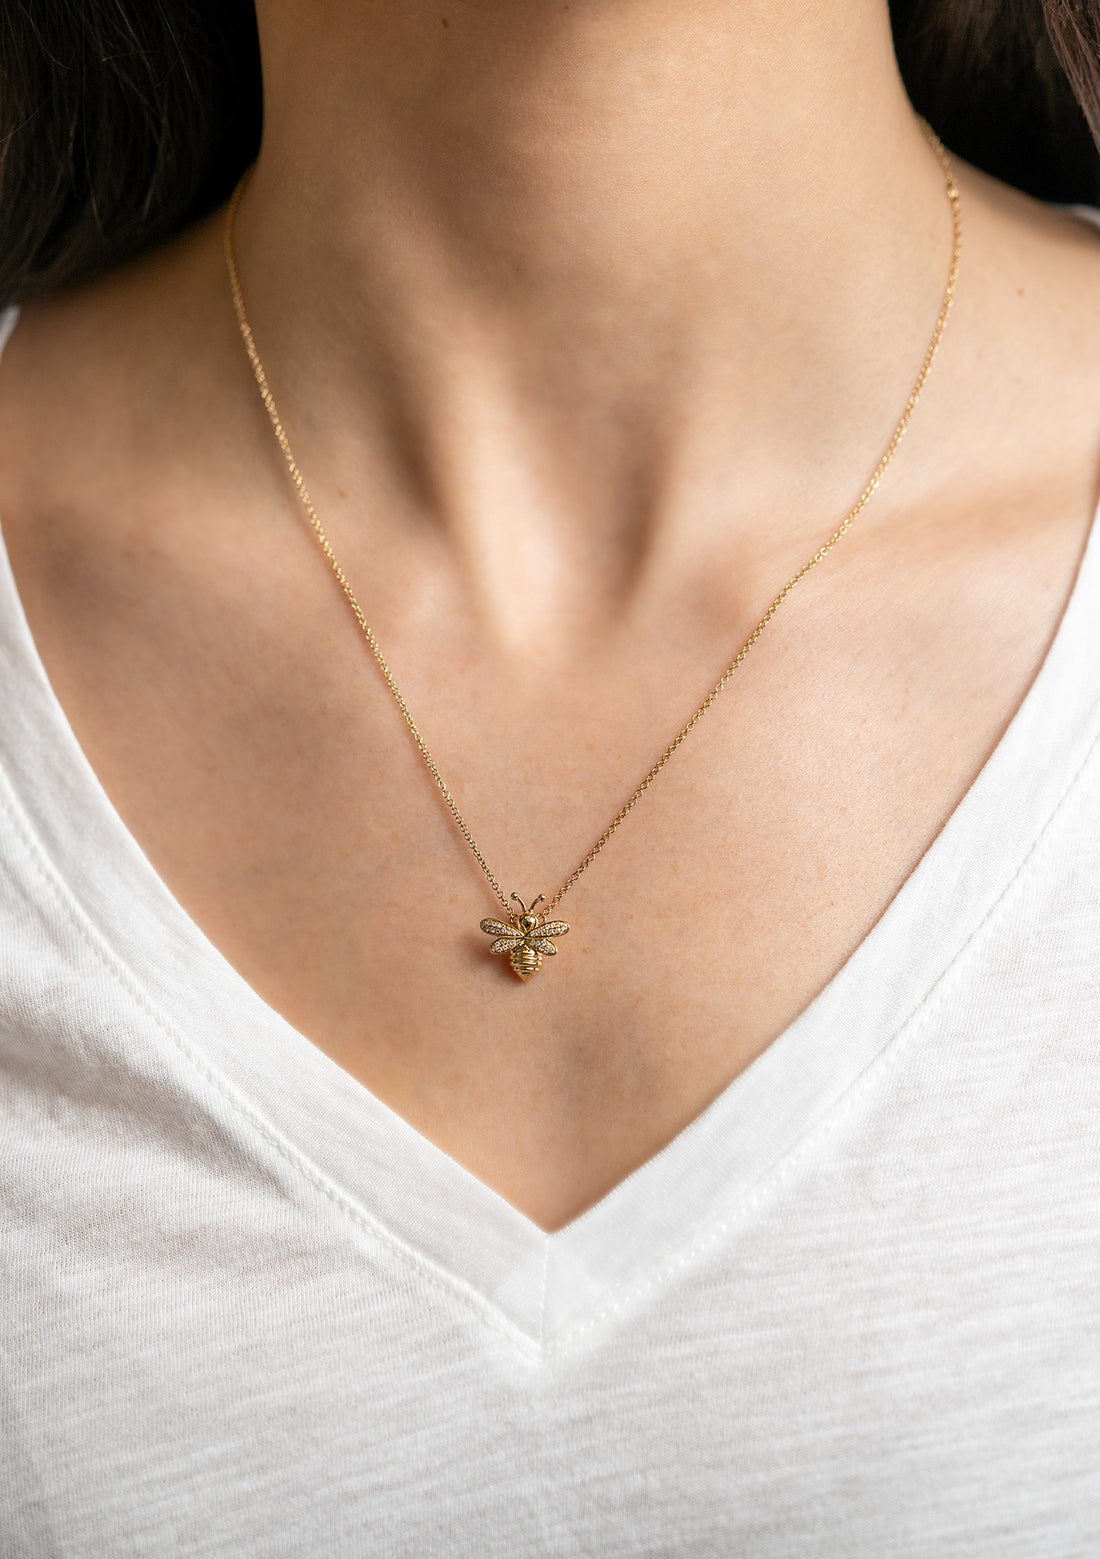 Diamond Bee Pendant Necklace by Shy Creation - Skeie's Jewelers